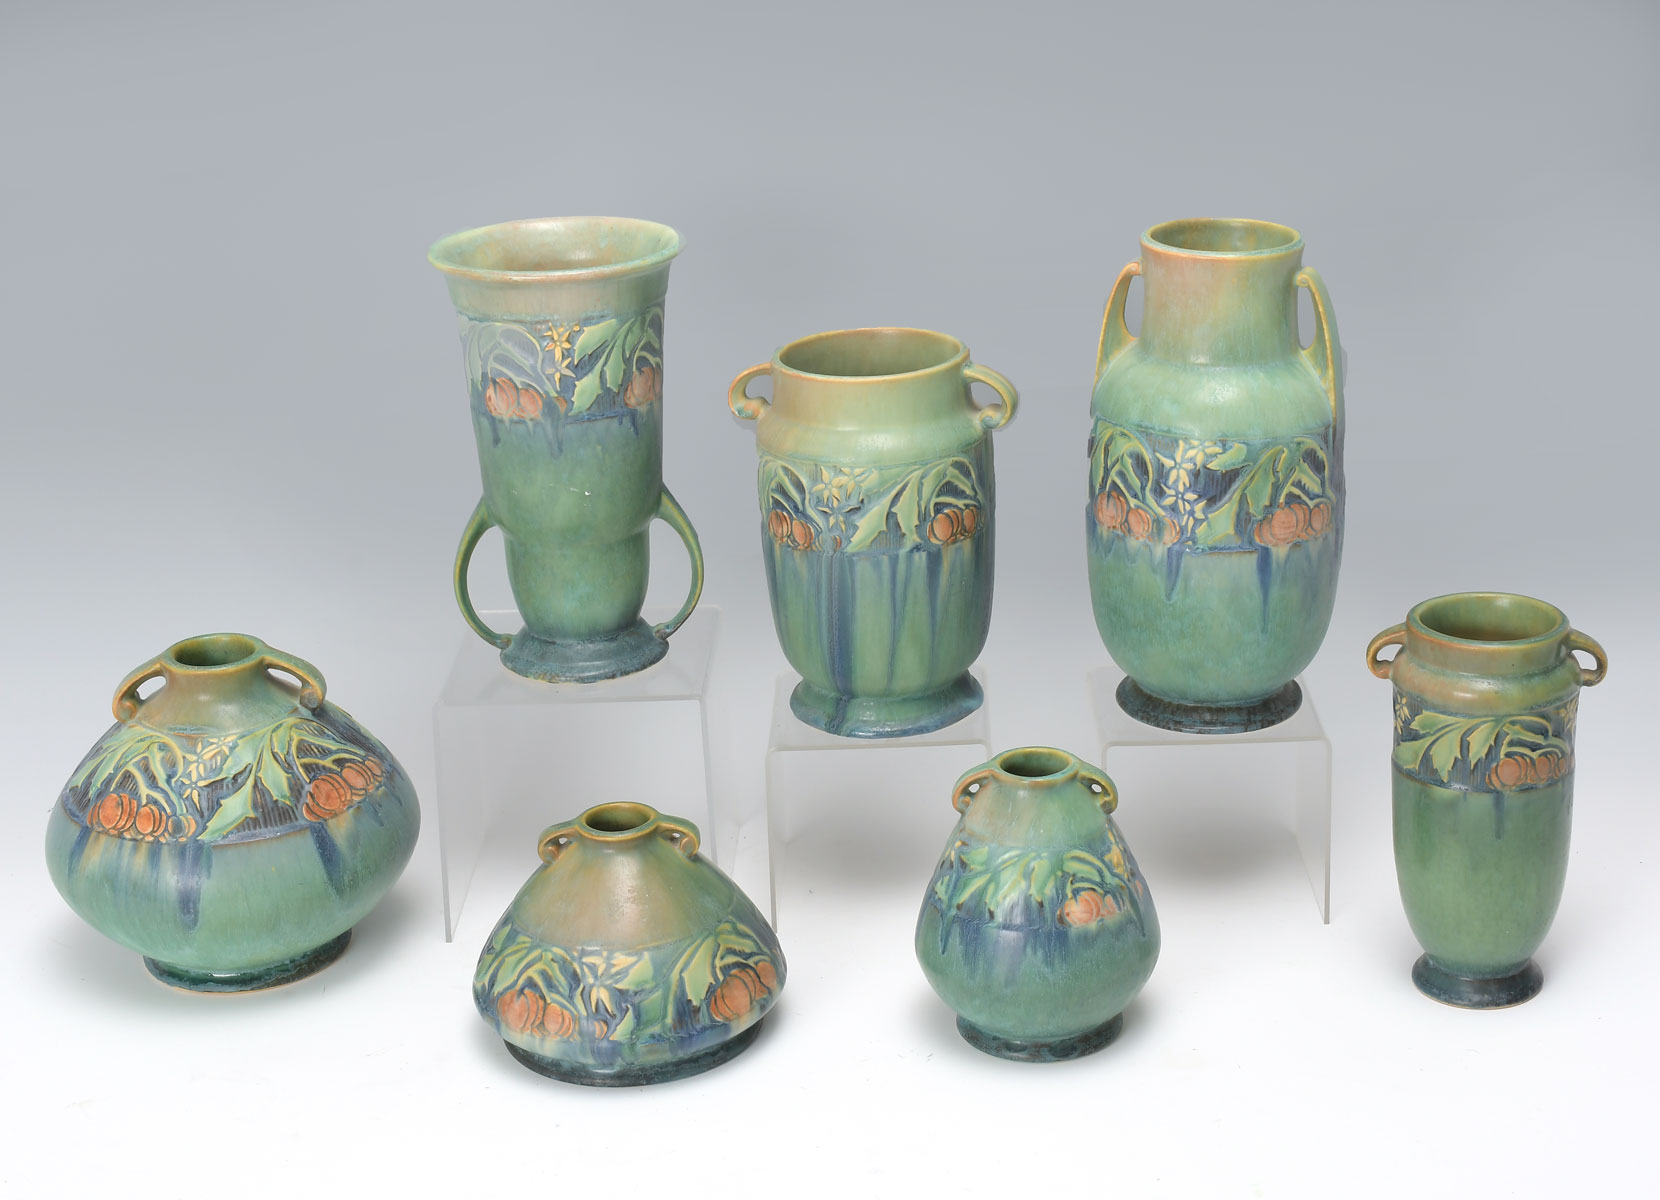 7 PC BANEDA ROSEVILLE POTTERY COLLECTION: